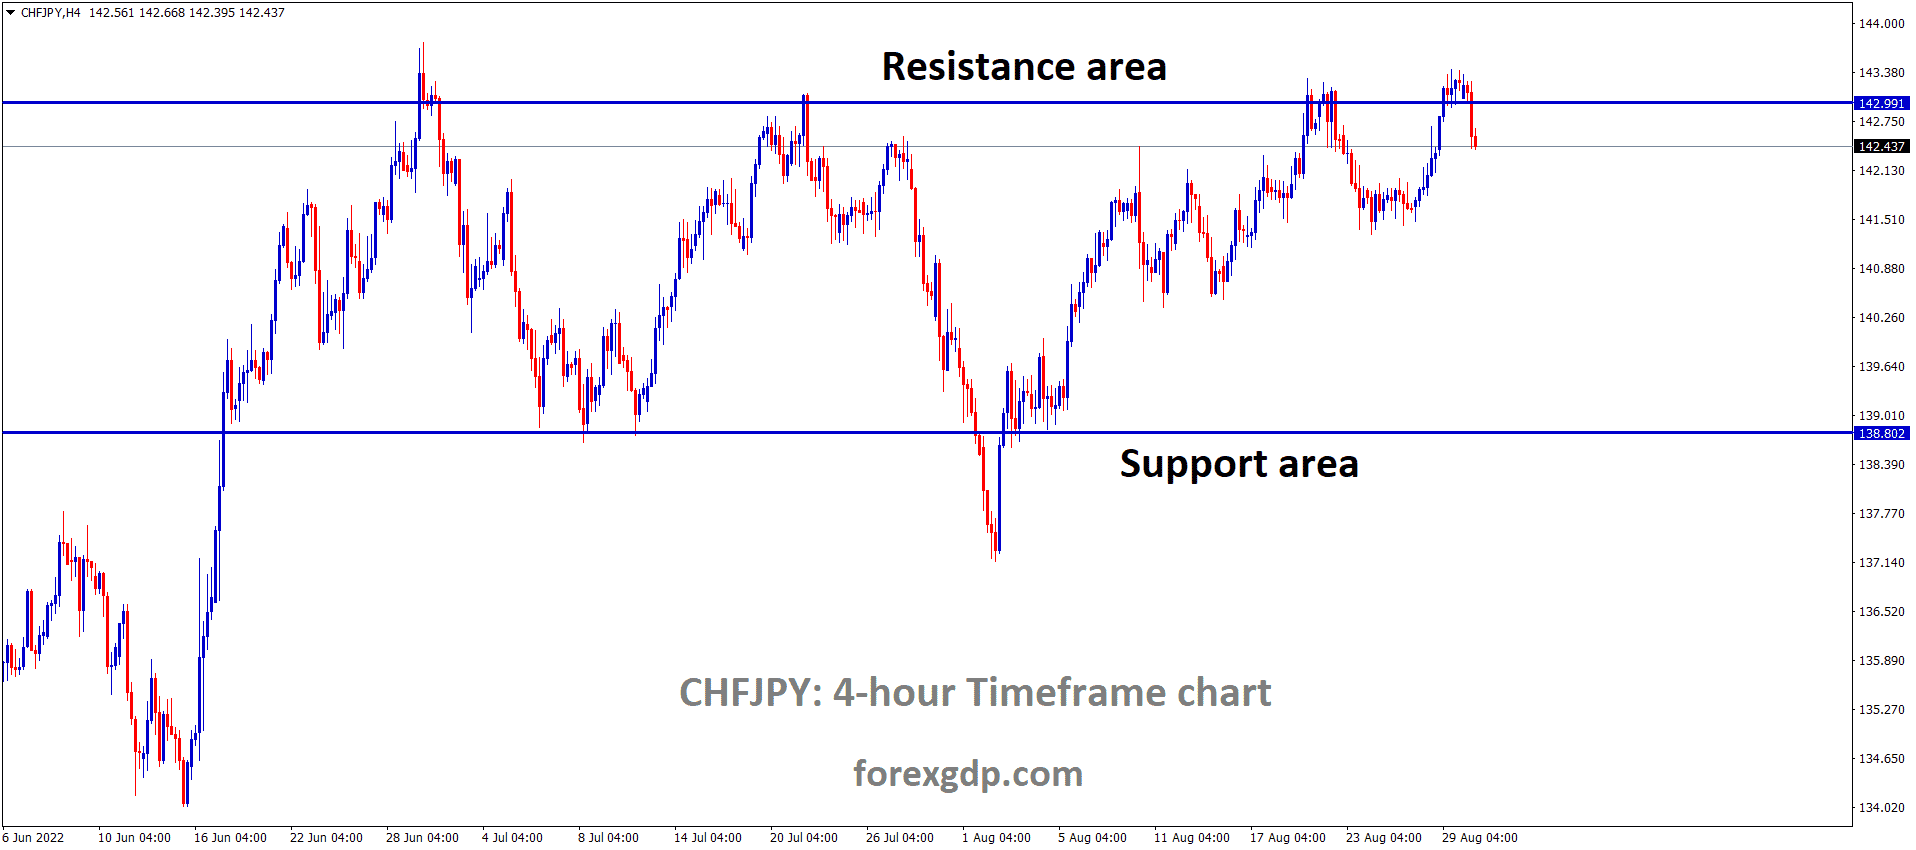 CHFJPY is moving in the Box Pattern and the market has fallen from the resistance area of the pattern